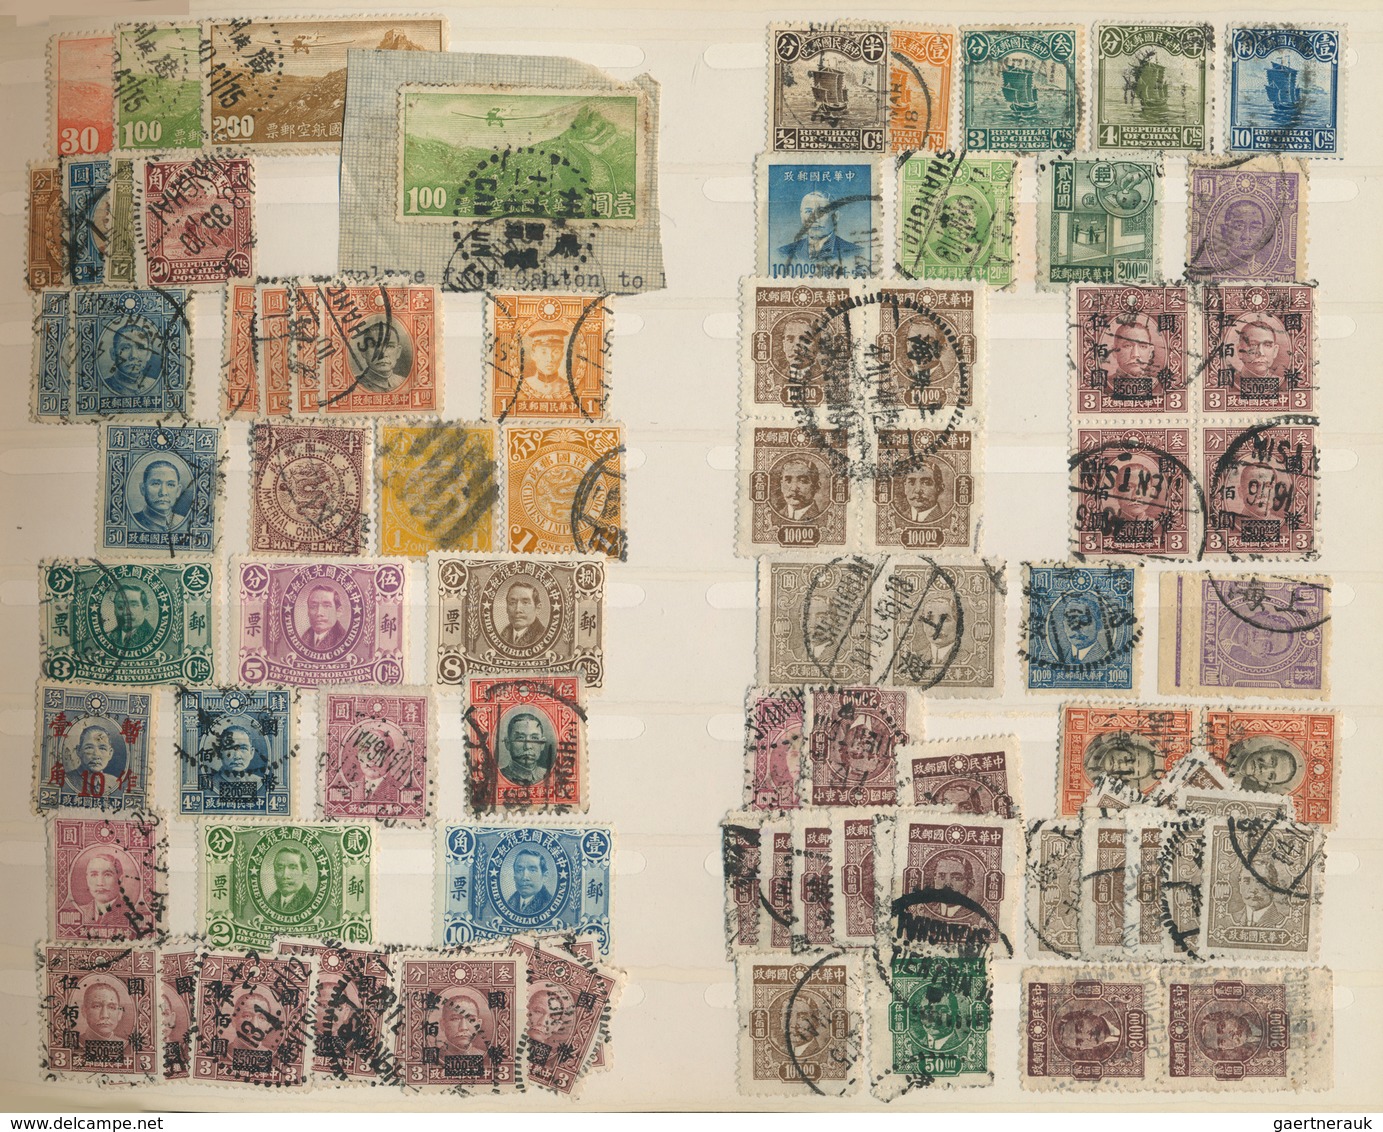 Asien: 1876/1952 (ca.), Mint And Mostly Used China, Siam, Japan, Malaya, Straits, Burma, India Etc. - Asia (Other)